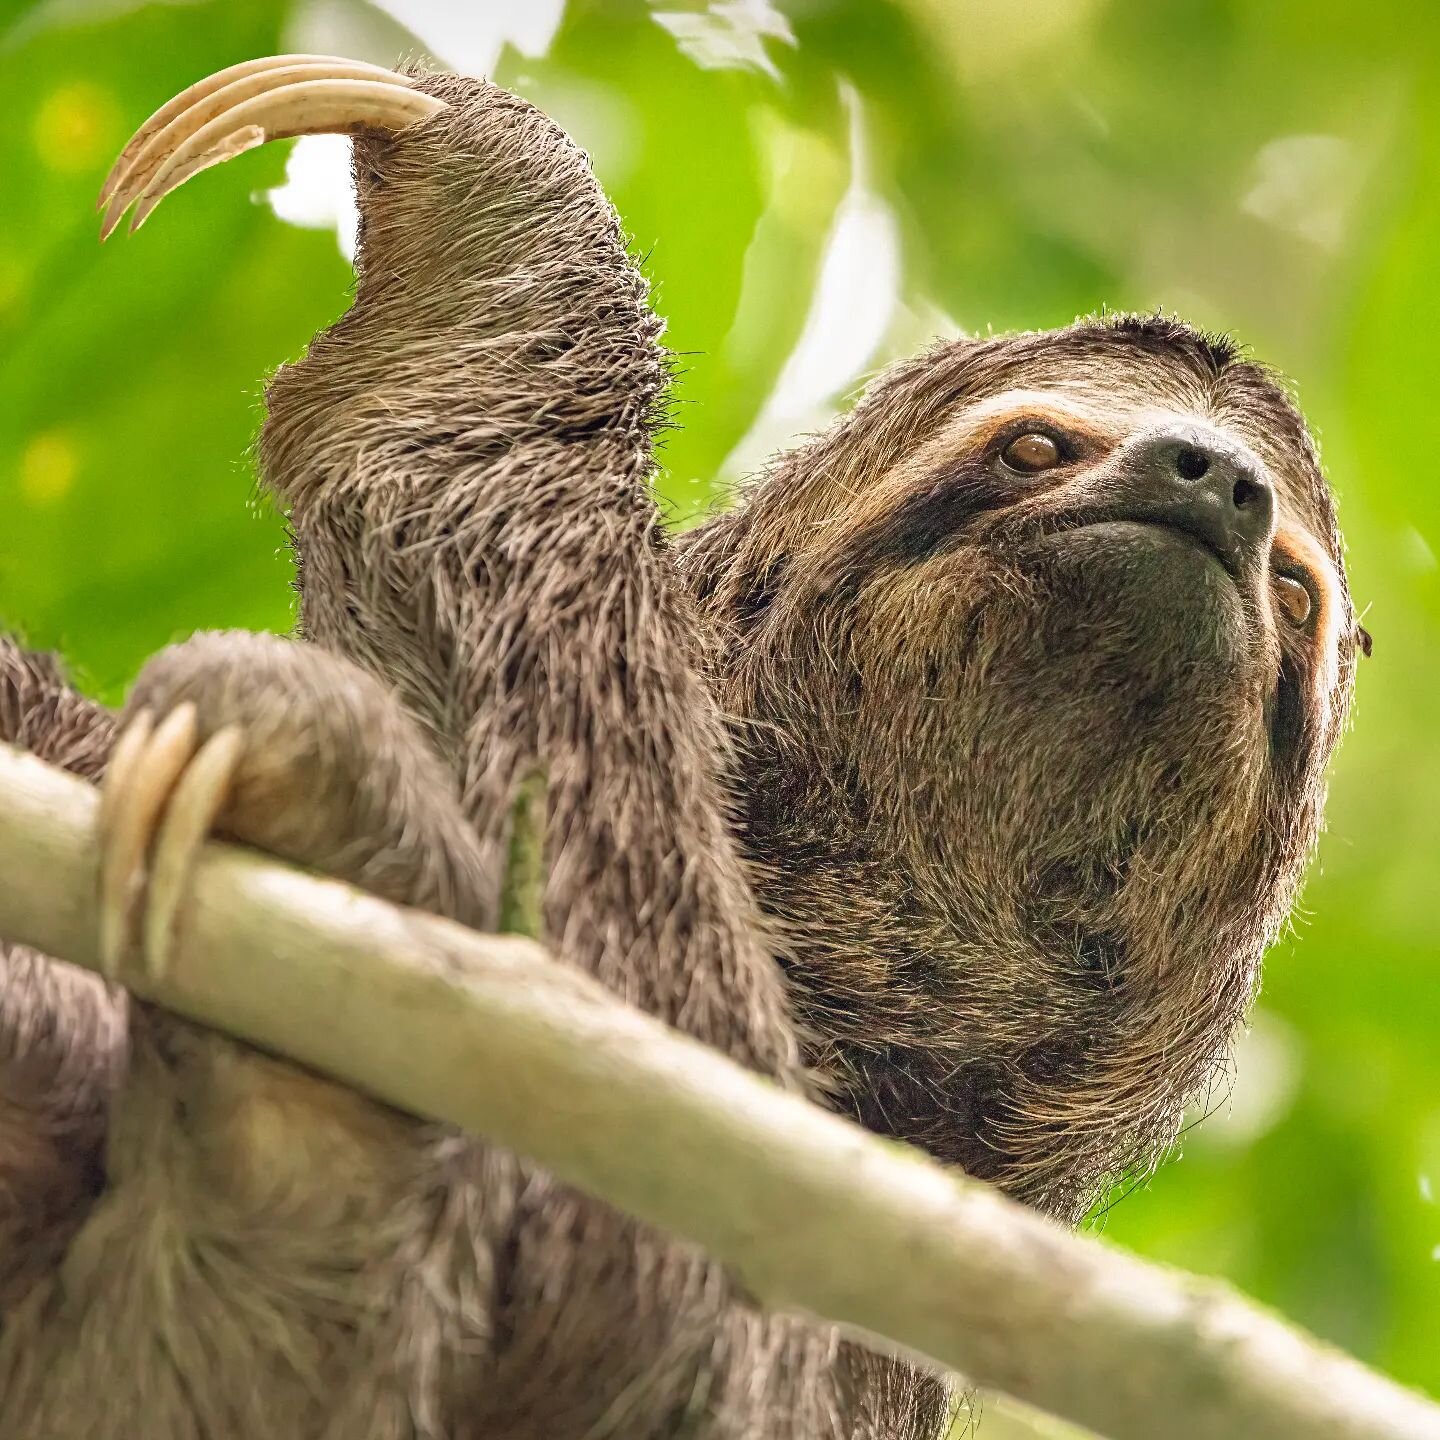 The three-toed sloth is active during the day, unlike the nocturnal two-toed sloth, and so is seen more often. This sloth only eats leaves from trees and lianas, but may feed on fifty individual trees of up to thirty species, eating leaves of differe